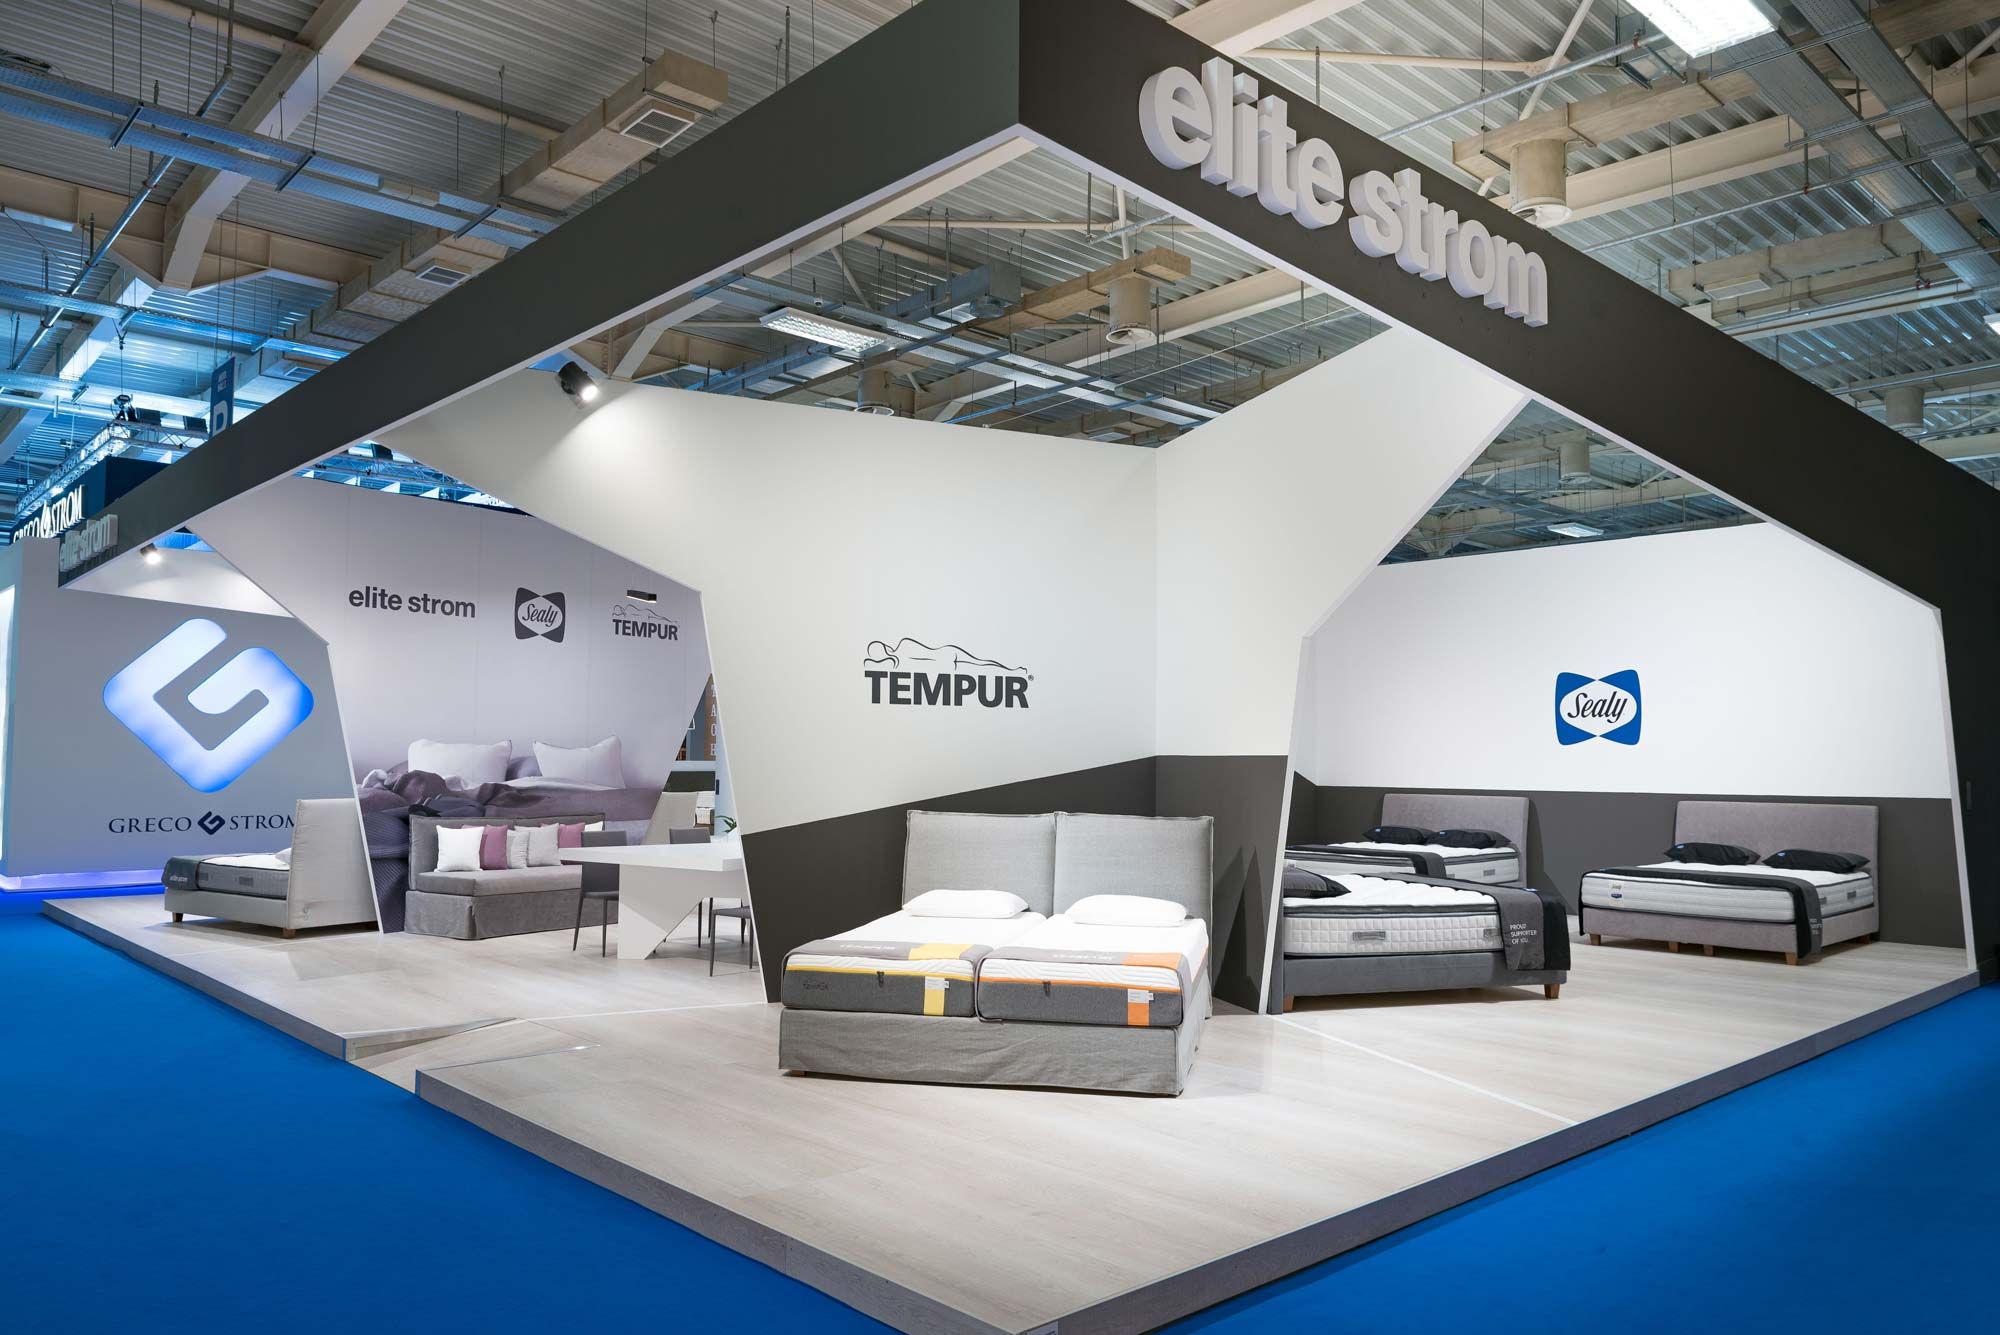 Elite strom was once again present this year at the International Exhibition HORECA 2020, at the Metropolitan Expo. Our participation was completed with great success and we are very happy for that. We would like to thank all those who visited our stand and discussed the needs and the future of their business through the complete sleep proposals of elite strom, TEMPUR and Sealy. We renew our appointment for 2021 with even more suggestions and surprises for your business.